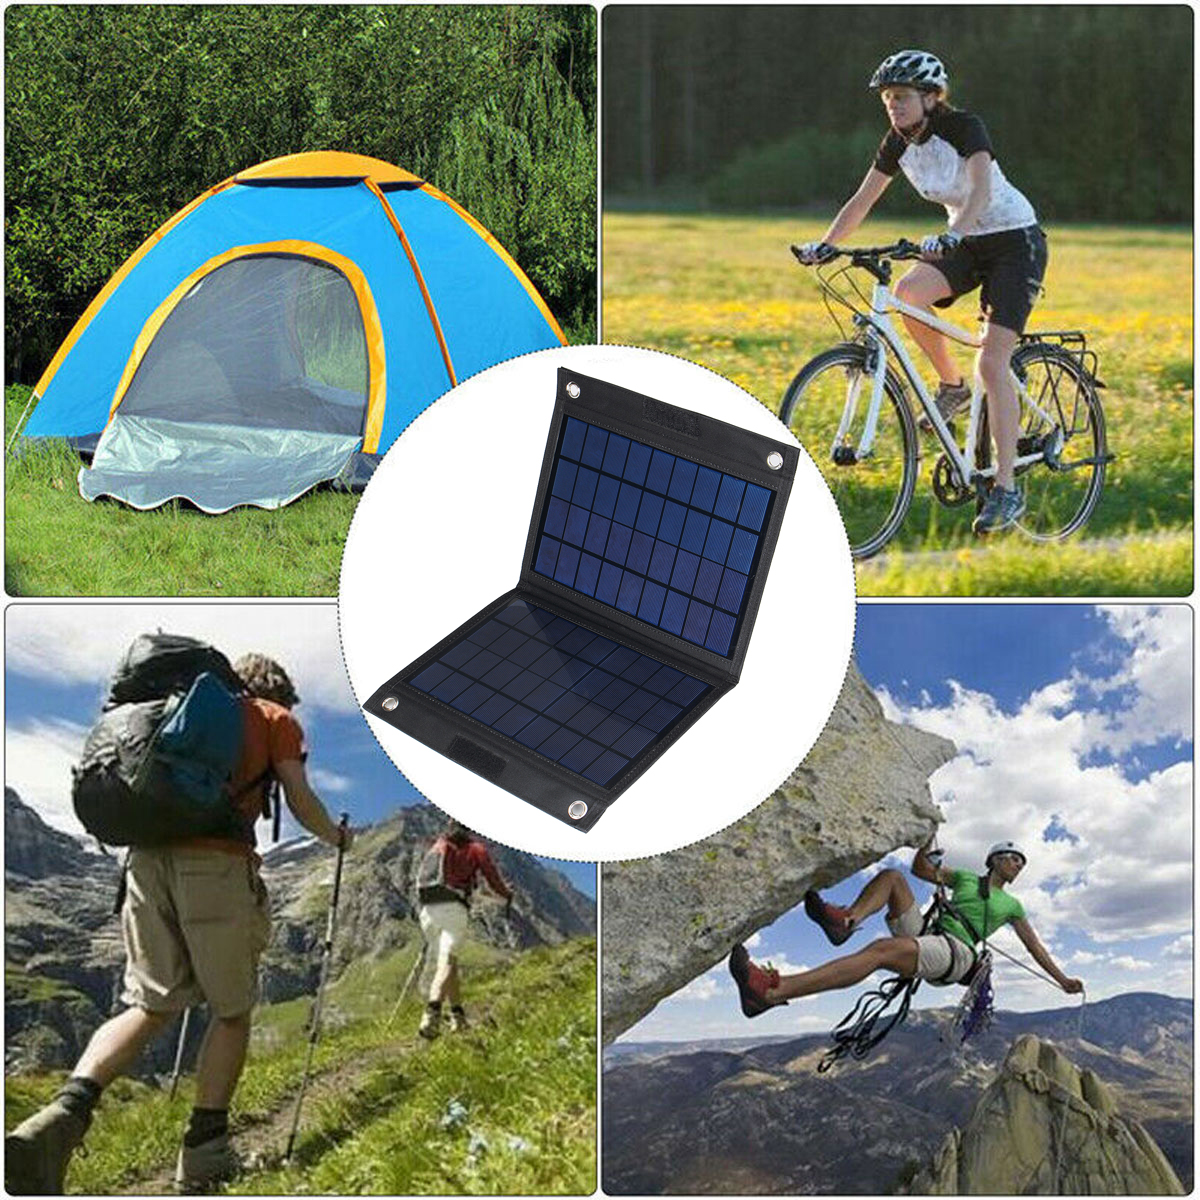 Sunpower-50W-18V-Foldable-Solar-Panel-Charger-Solar-Power-Bank-for-Camping-Hiking-USB-Backpacking-Po-1627758-2